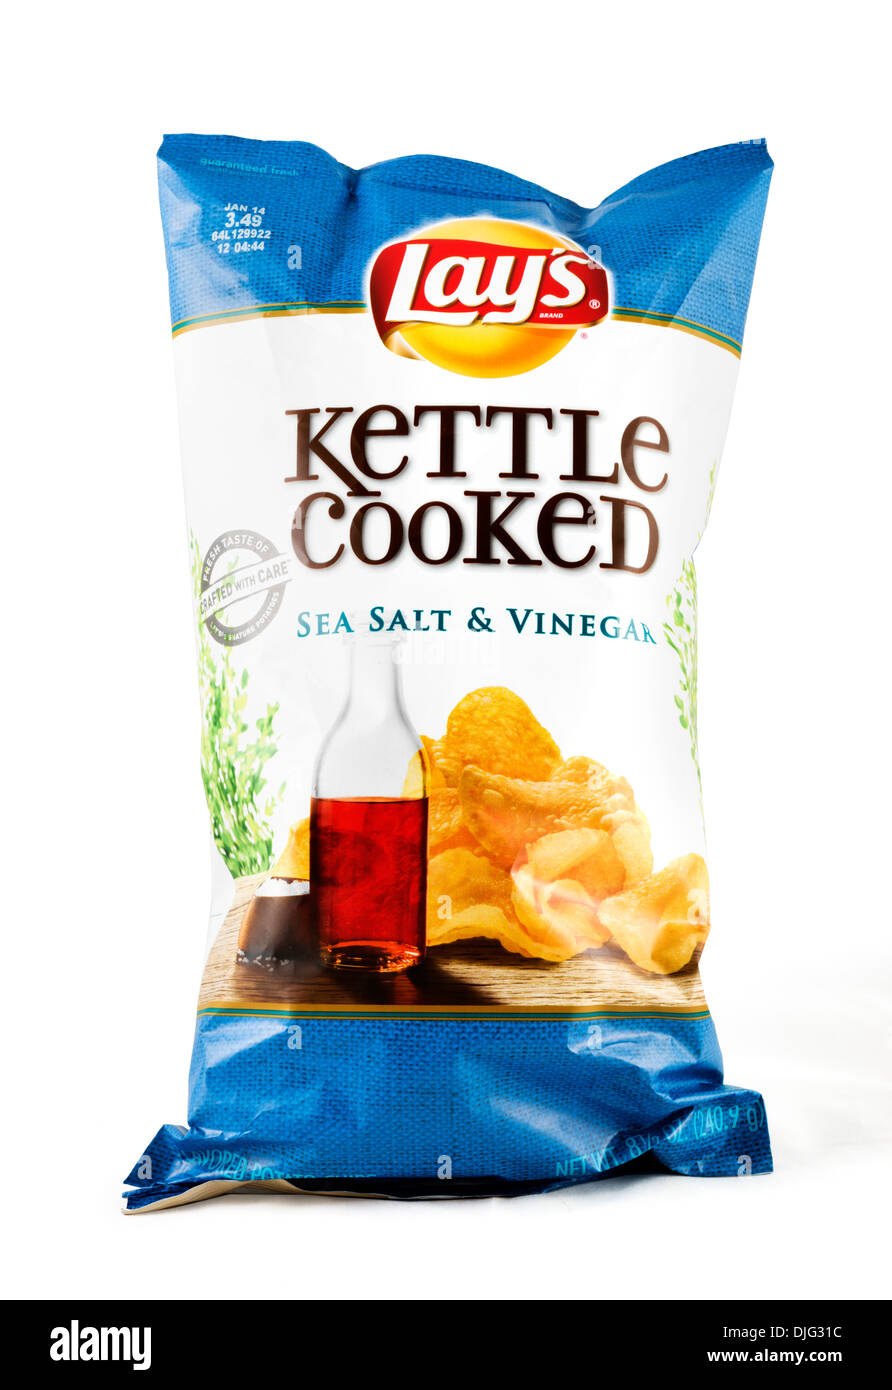 Large packet of Lay's Kettle Cooked Sea Salt and Vinegar Potato Chips, USA Stock Photo